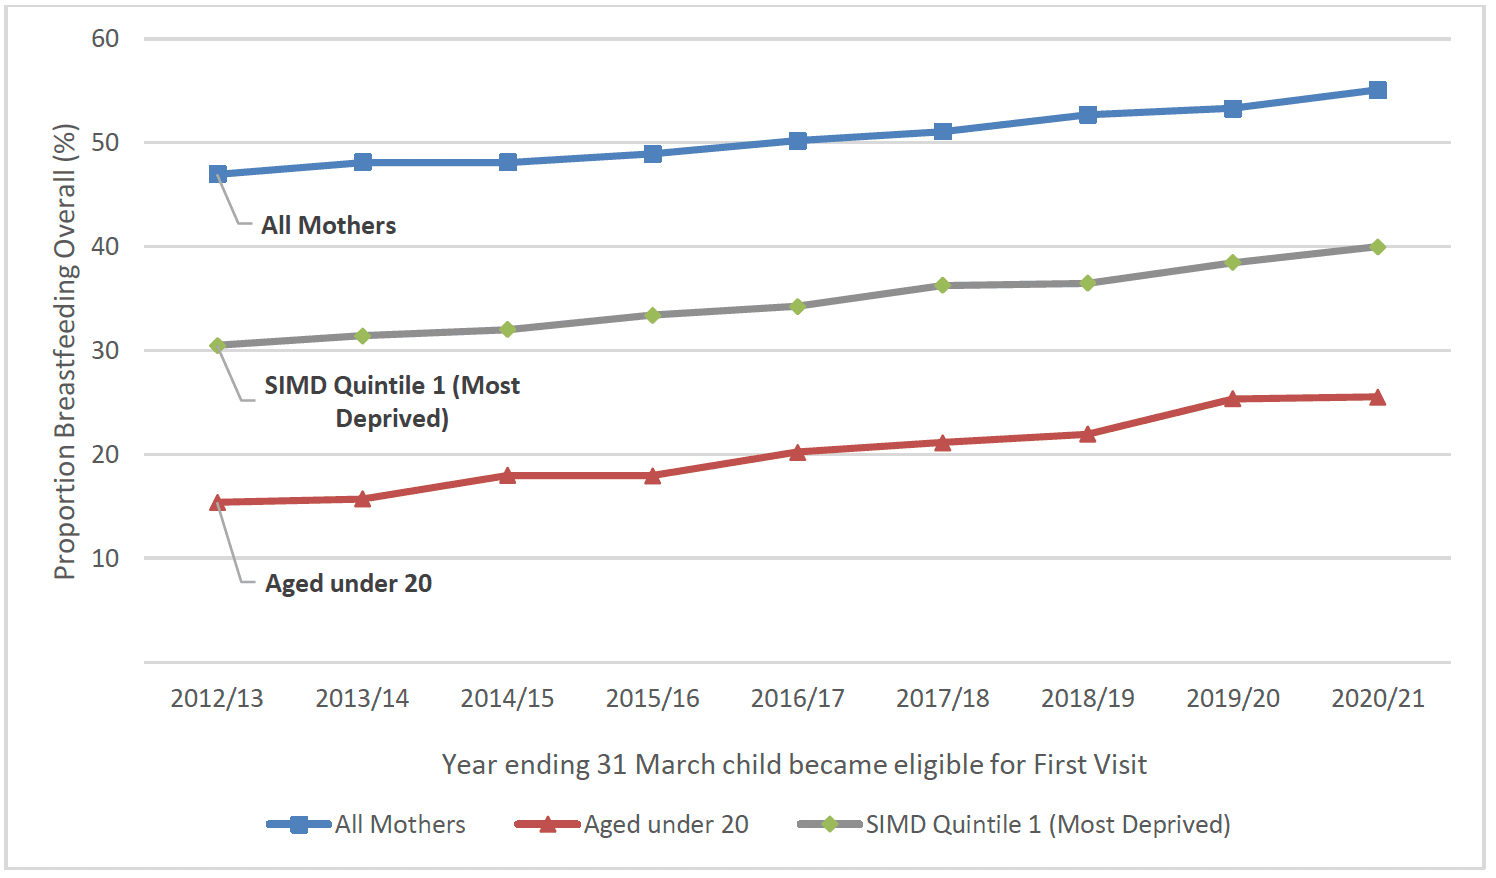 Chart 30 shows the proportion of mothers in Scotland breastfeeding at first visit, and those aged under 20 and in SIMD quintile 1 breastfeeding at first visit, between 2012/13 and 2020/21. Overall, those in SIMD 1 and those aged under 20 had a lower breastfeeding rate than the national rate, though the breastfeeding rate increased in both groups, as well as nationally, over the time-period.